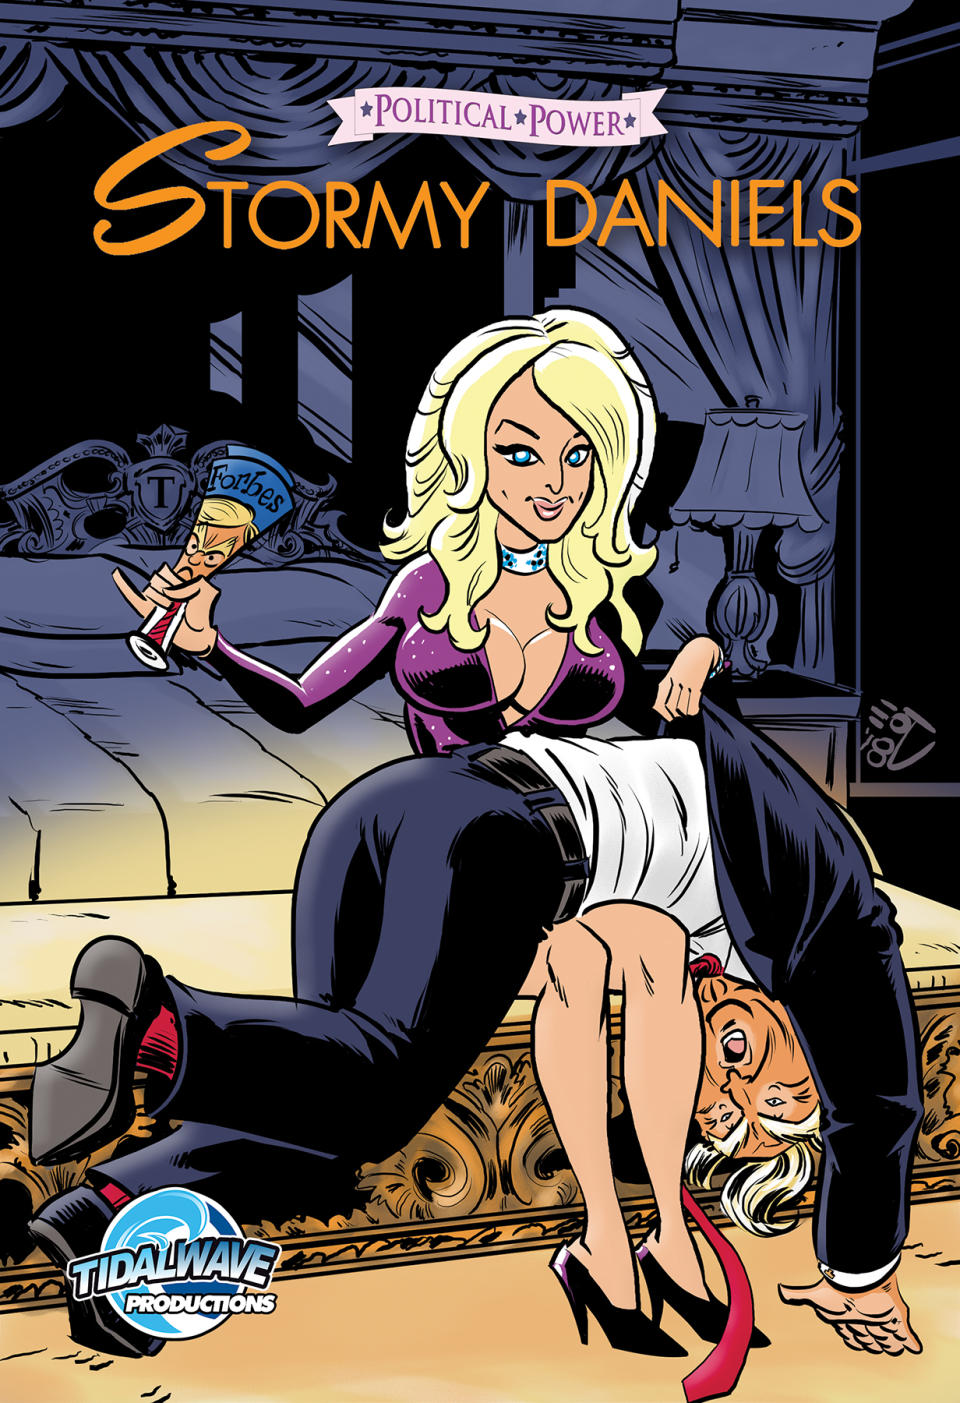 Stormy Daniels spanks President Trump in a scene from a new graphic novel. (Photo: TidalWave Productions)